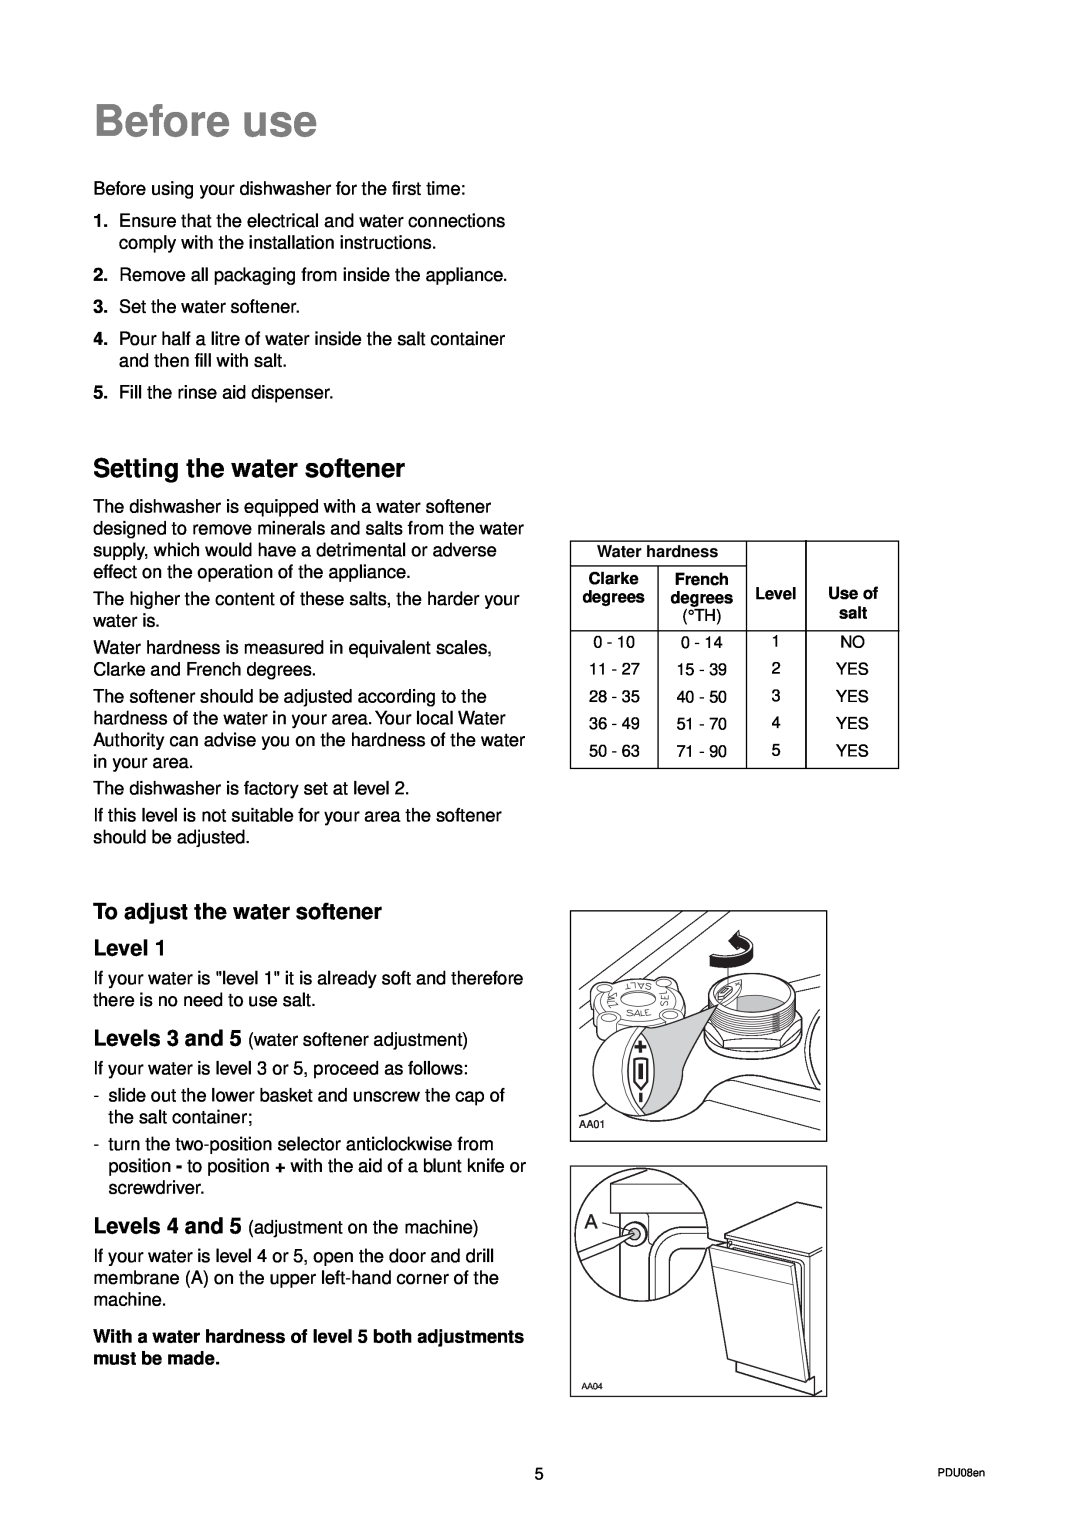 Electrolux DW 80 manual Before use, Setting the water softener, To adjust the water softener Level 